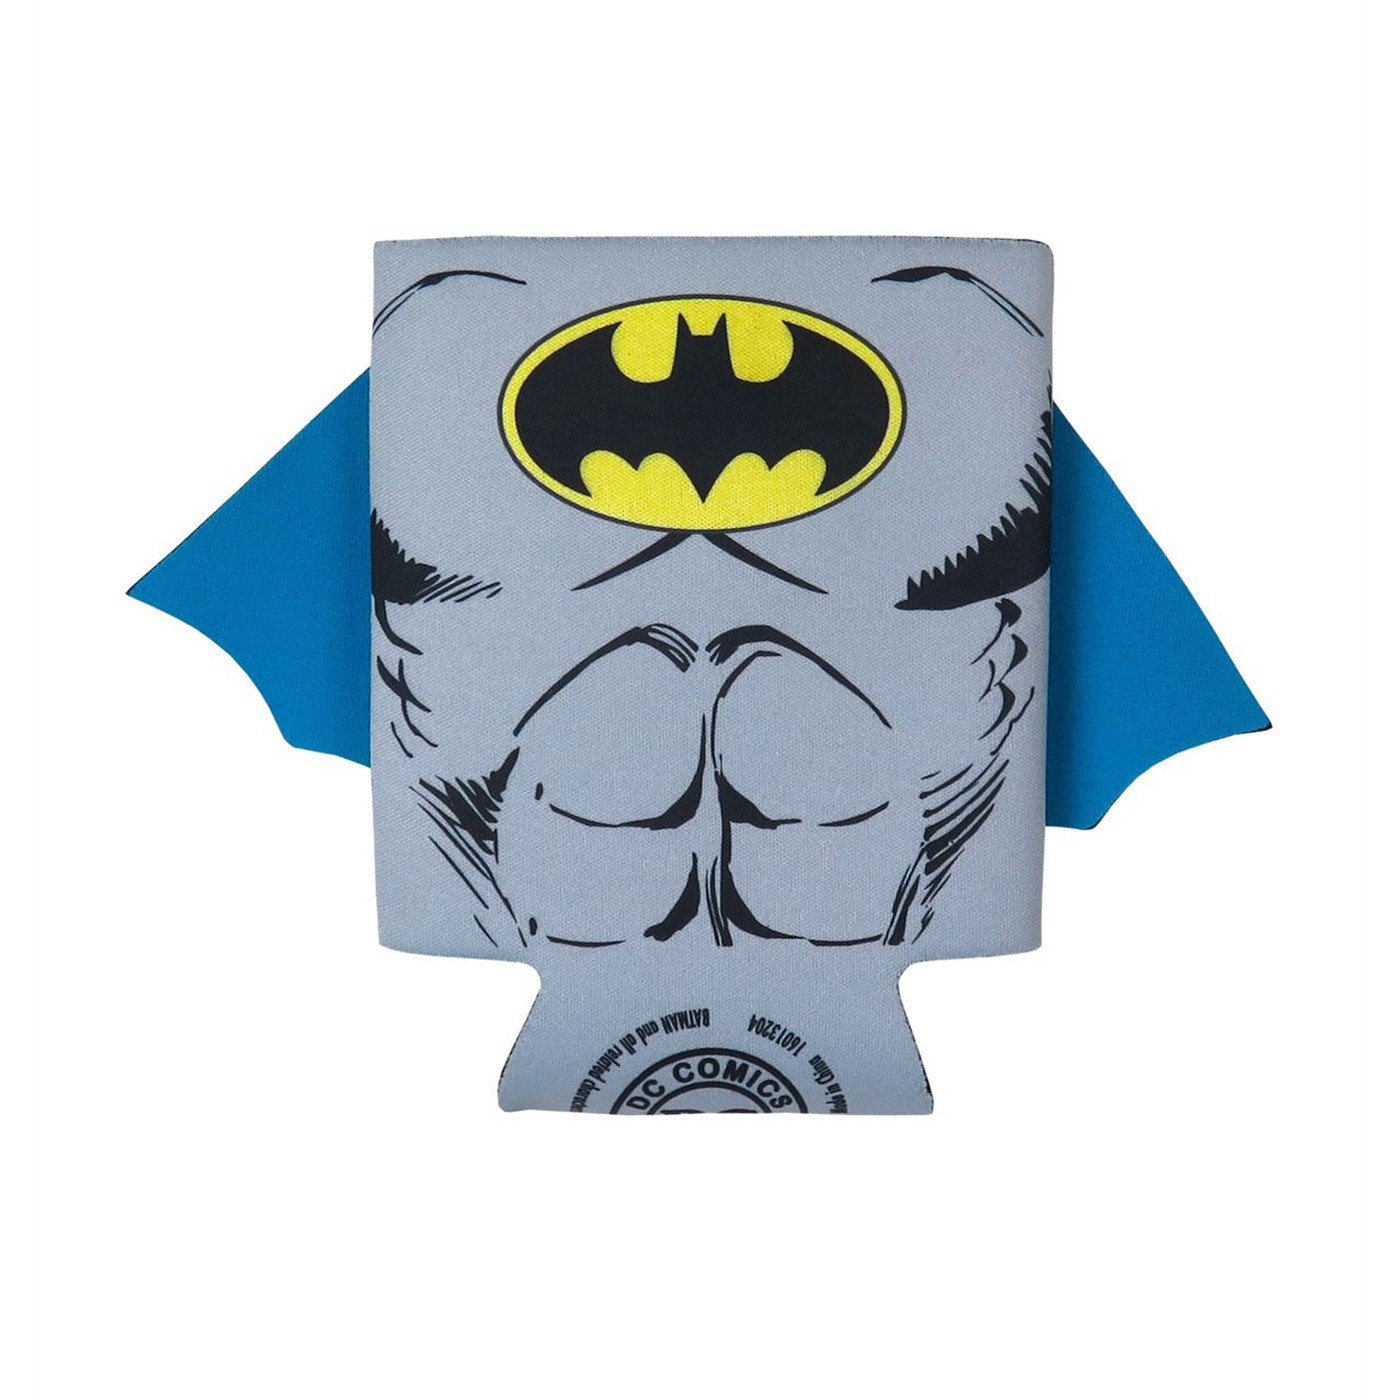 Batman Caped Can and Bottle Cooler